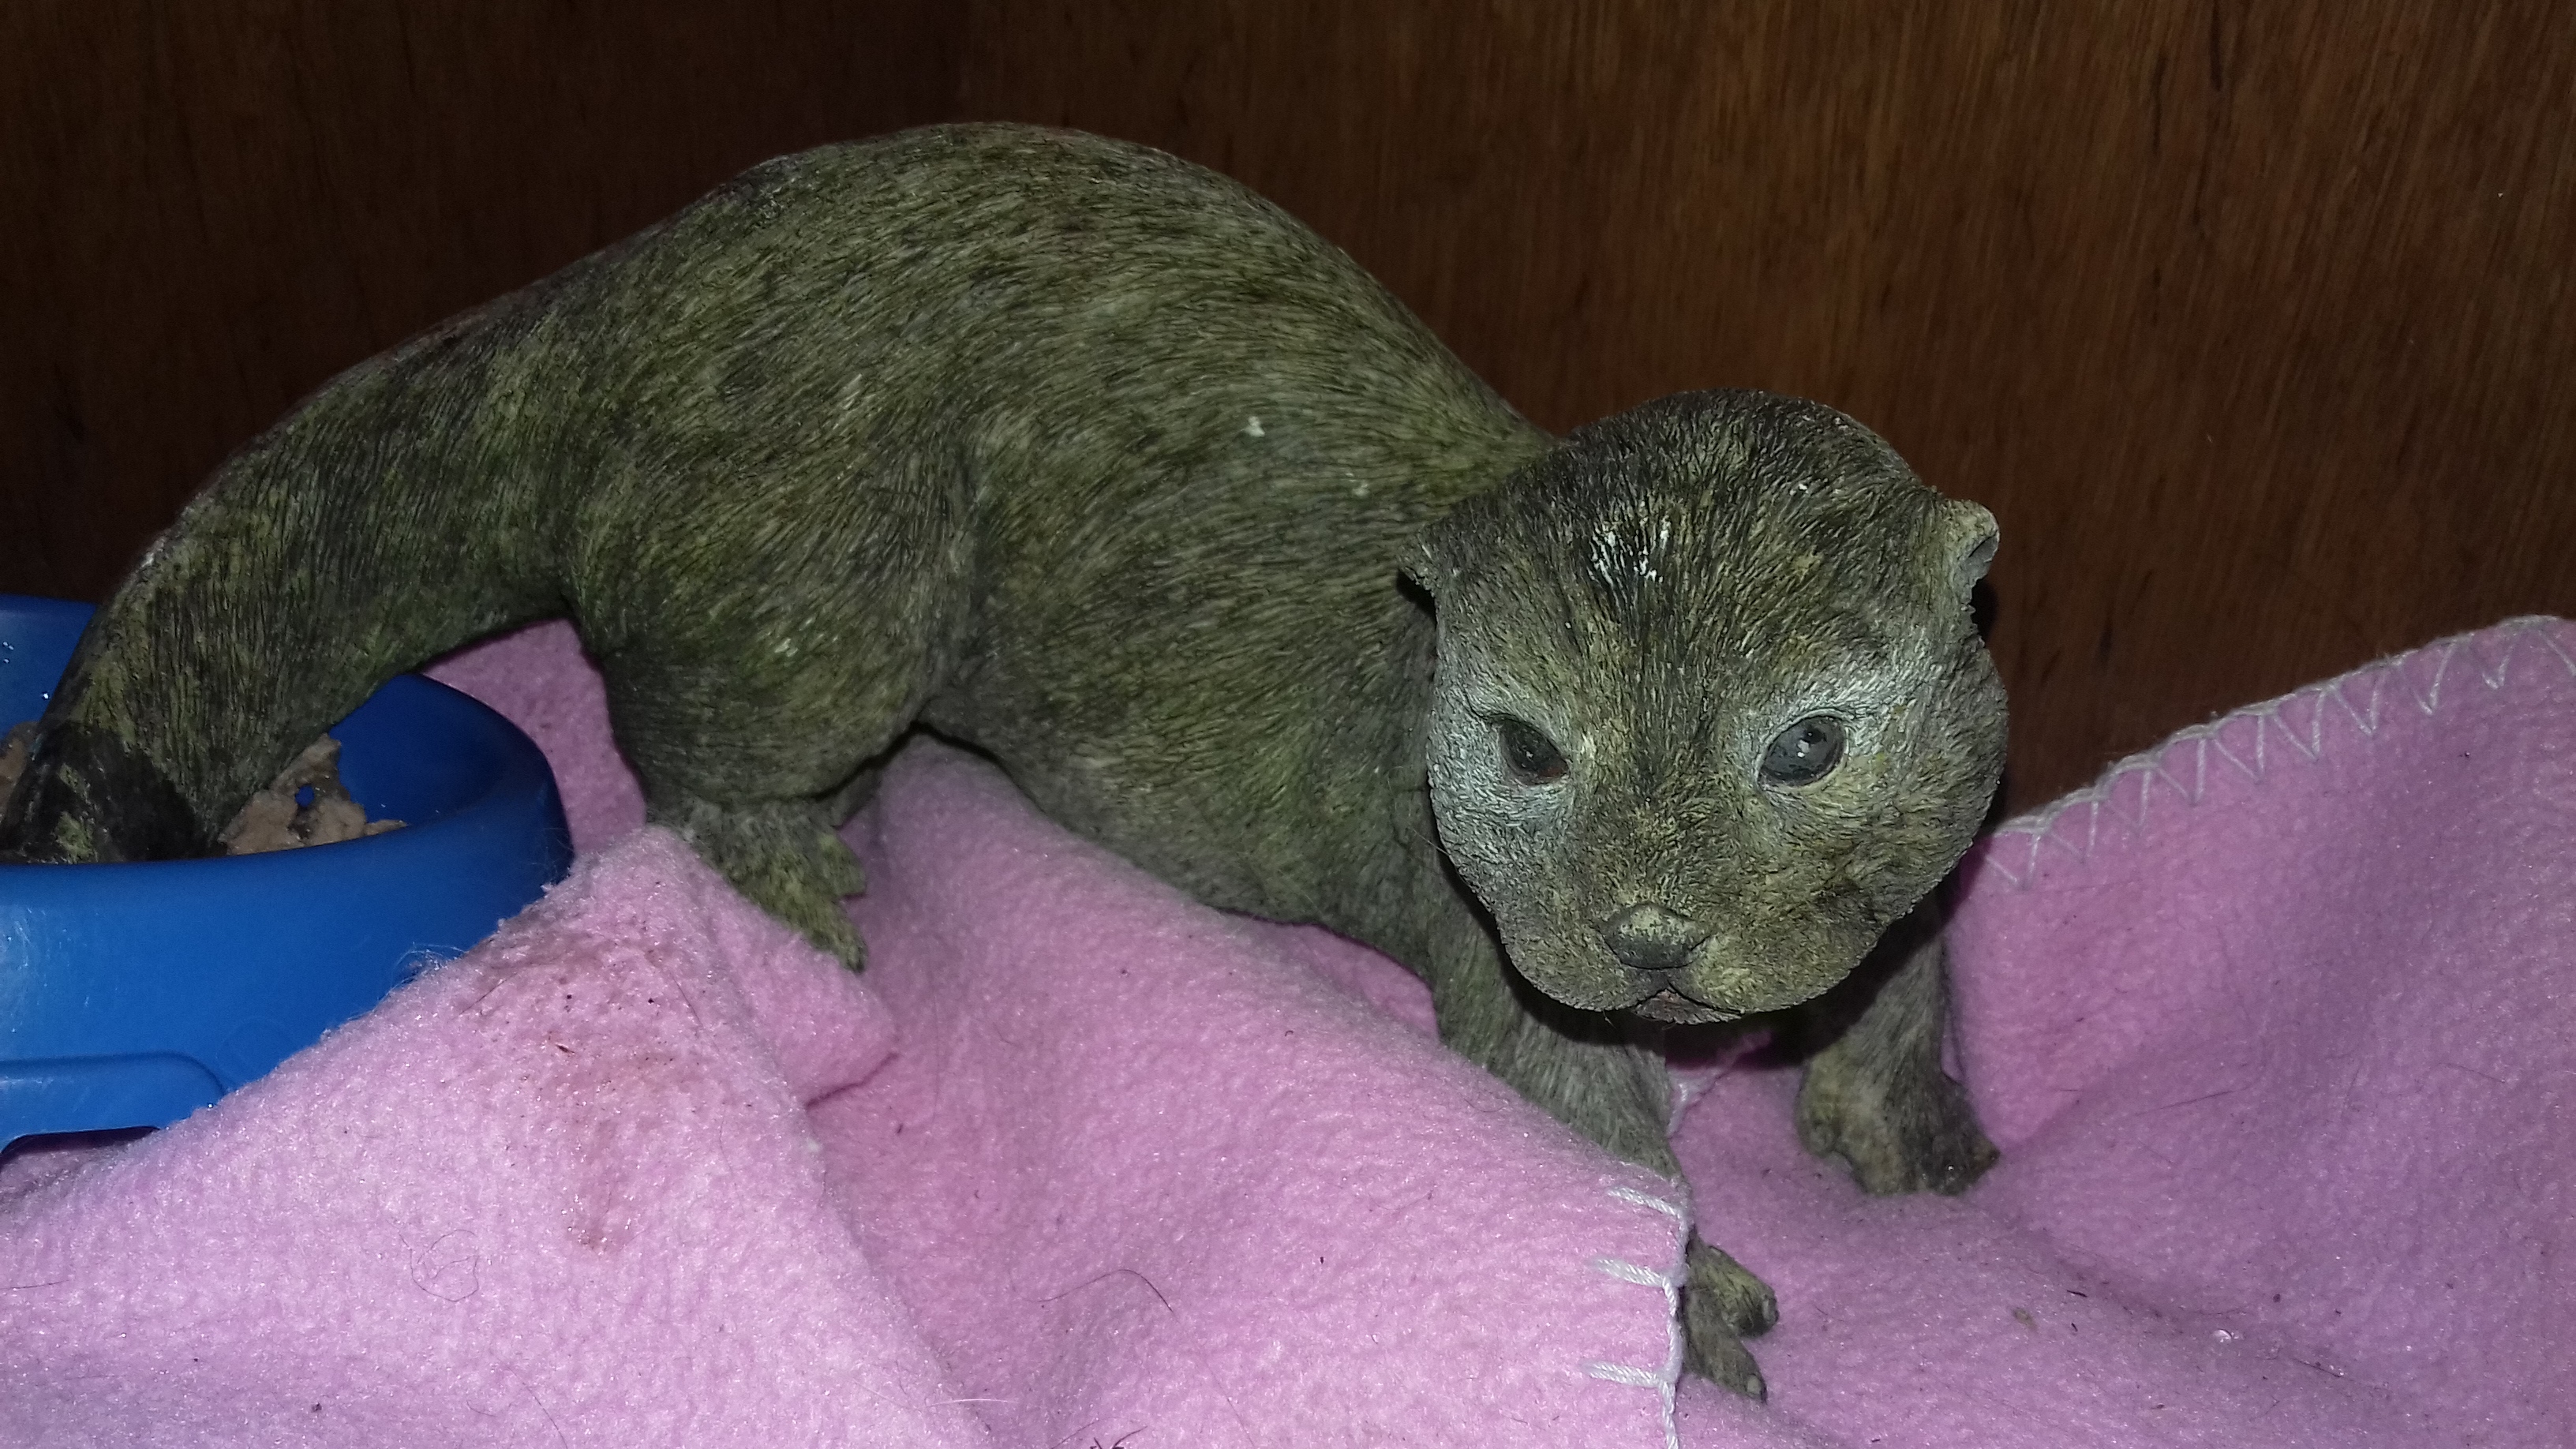 Scotland’s animal welfare charity was alerted to the 12 inch long ‘lizard’ on Tuesday when the owner was checking on her feline.